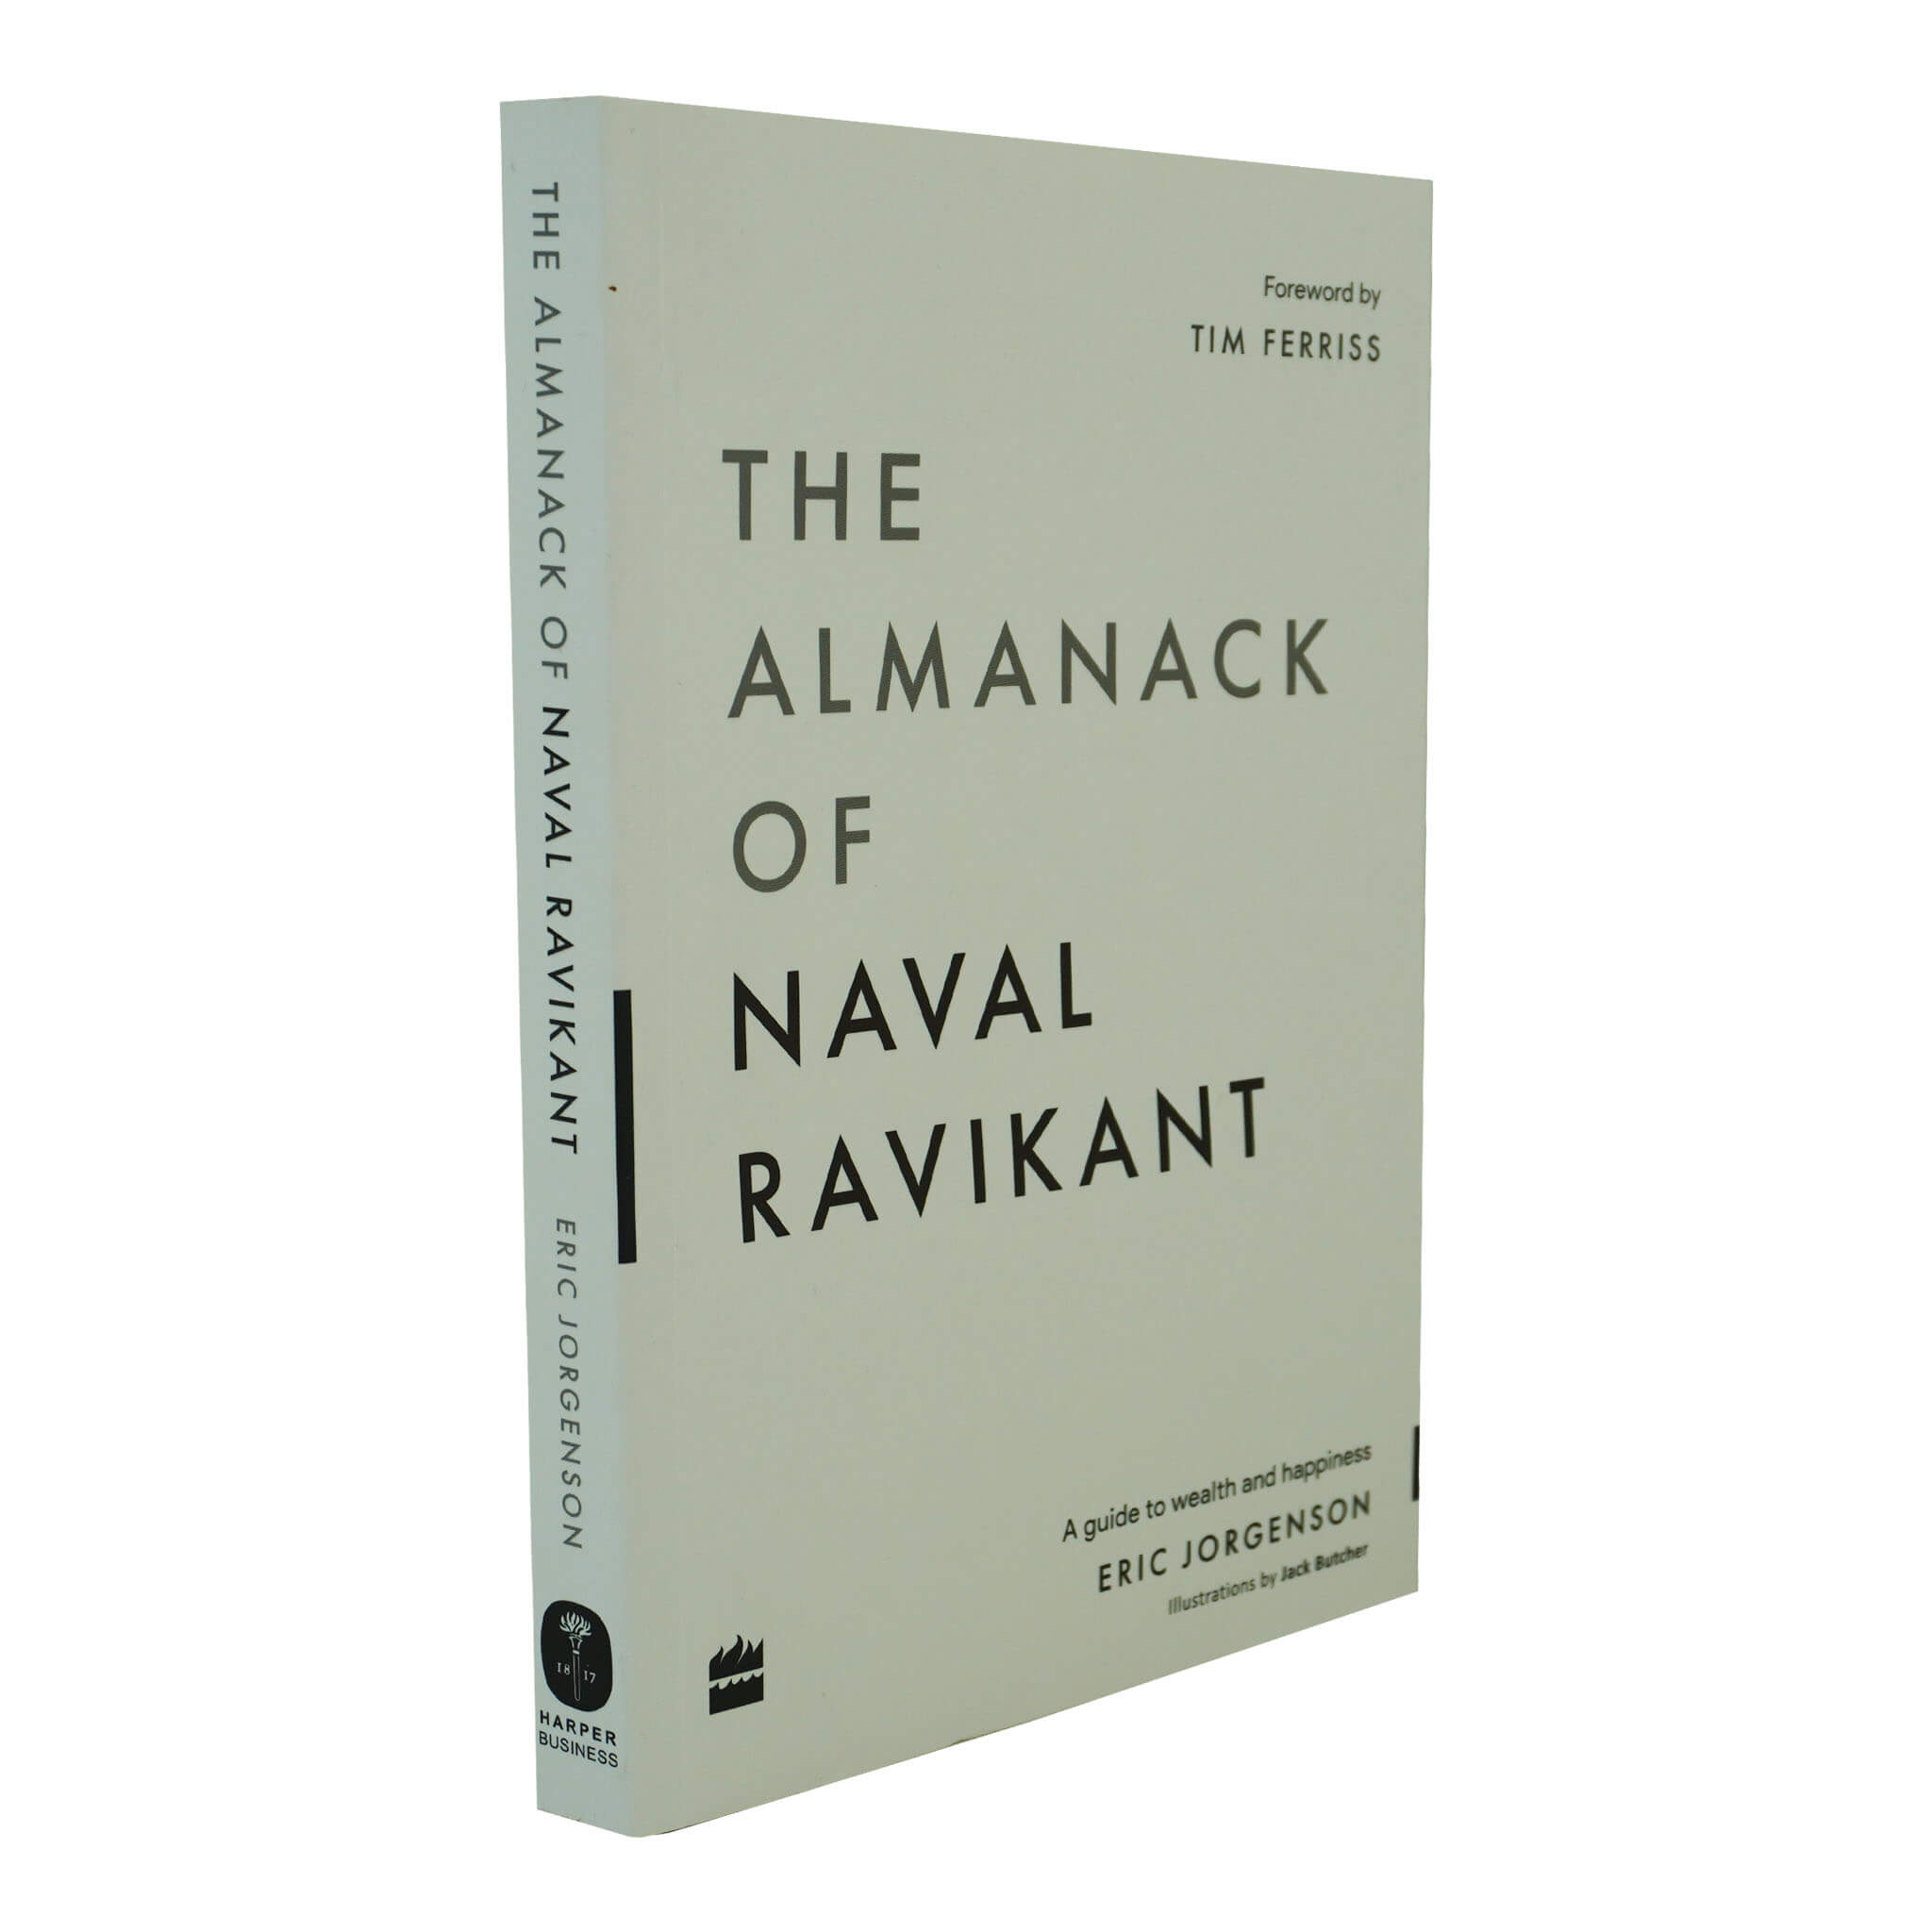 The Almanack Of Naval Ravikant: A Guide to Wealth and Happiness - Paperback  Book